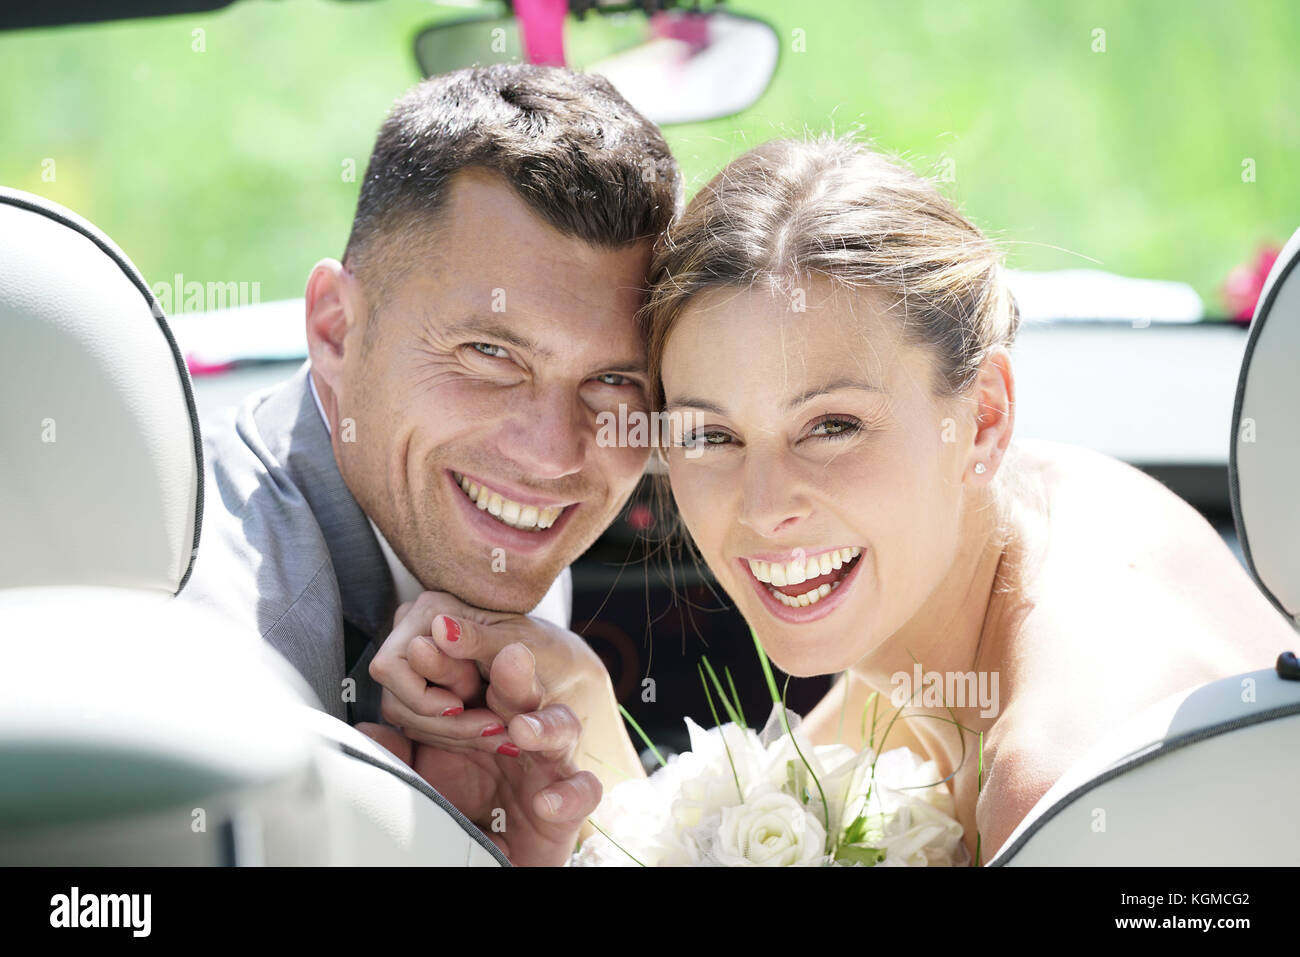 Bride and Groom sitting in convertible car Banque D'Images